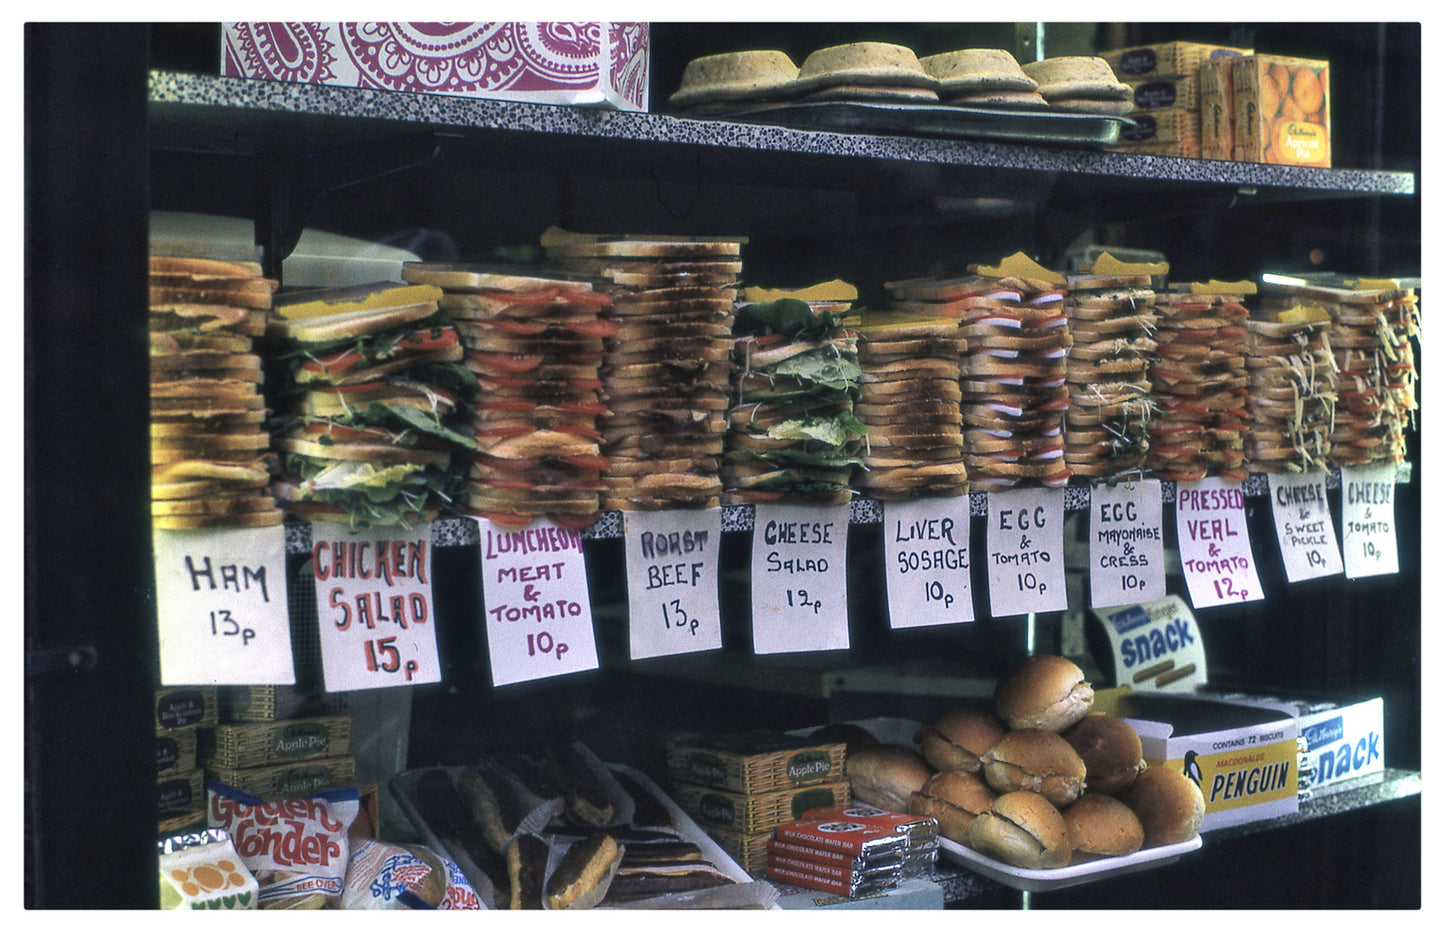 Sandwiches for Sale in London - 1972